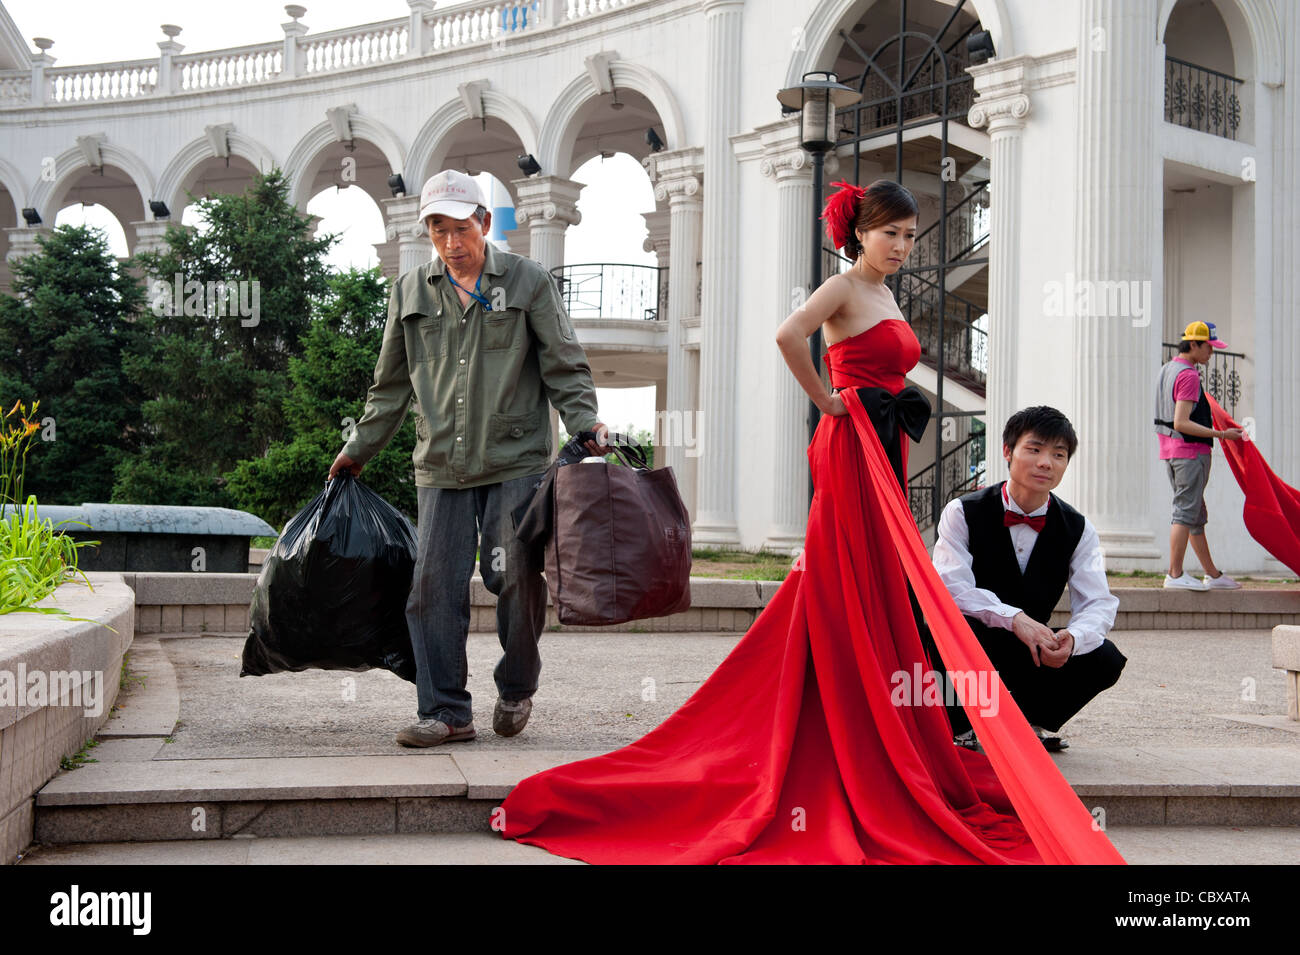 Beijing, Chaoyang Park. Worker carrying garbage passing a wedding photo shoot. Stock Photo